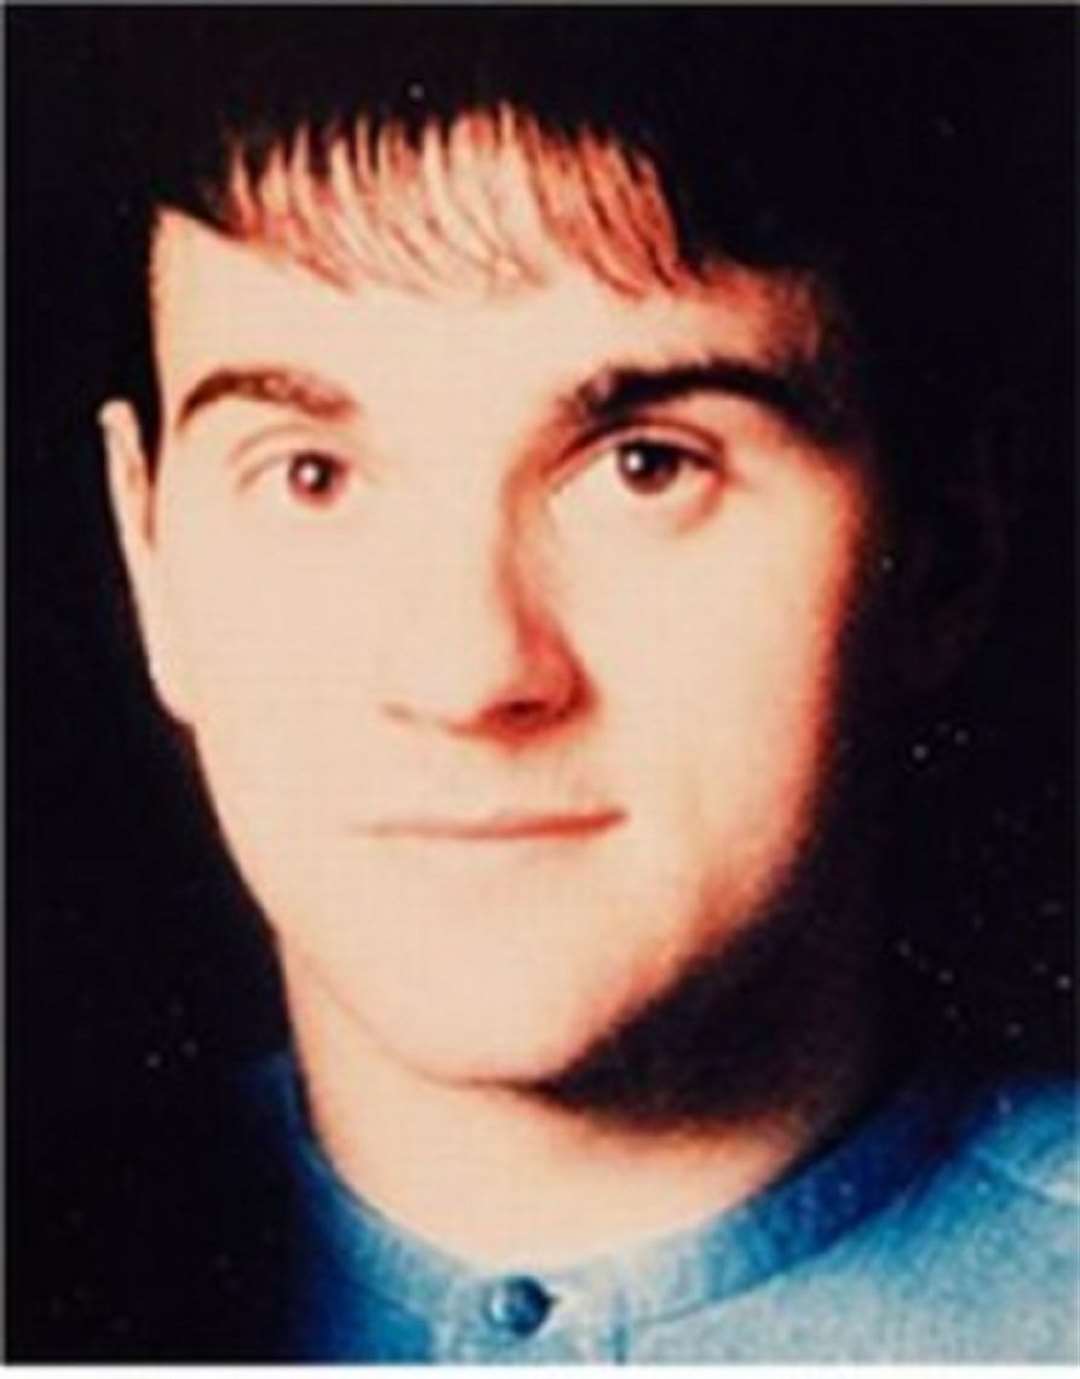 Kevin Mcleod's body was found in Wick harbour in February, 1997.